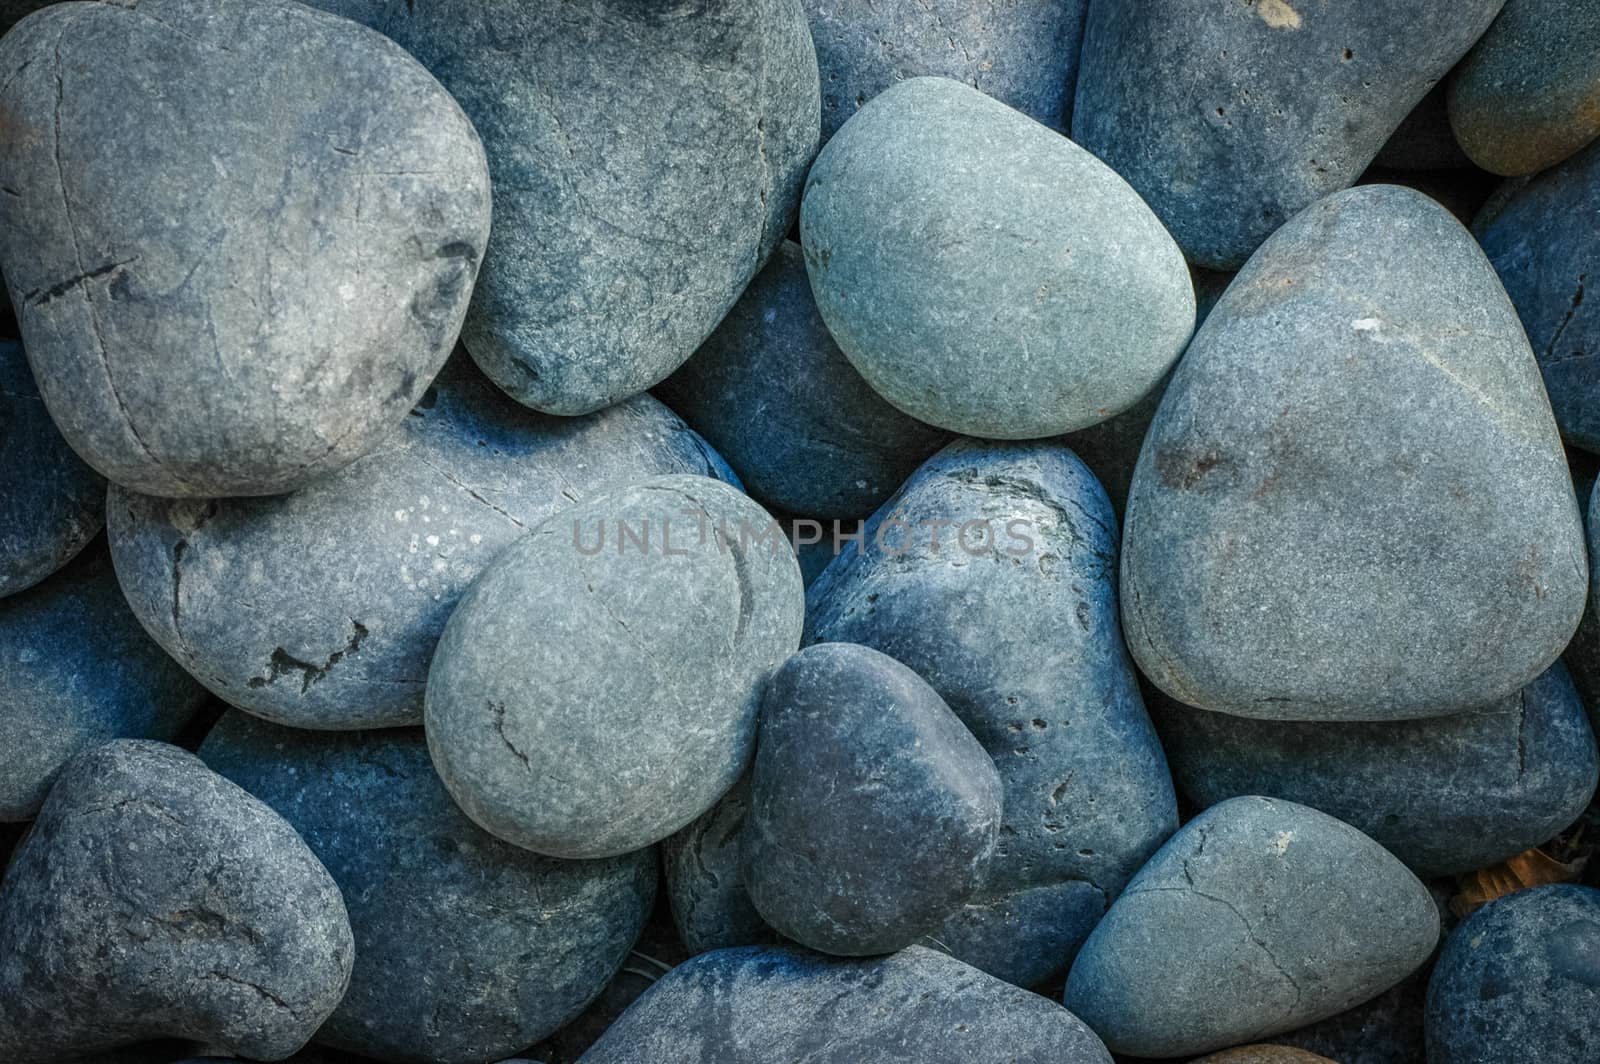 A Background Texture Of Smooth Rocks Stones Or Pebbles